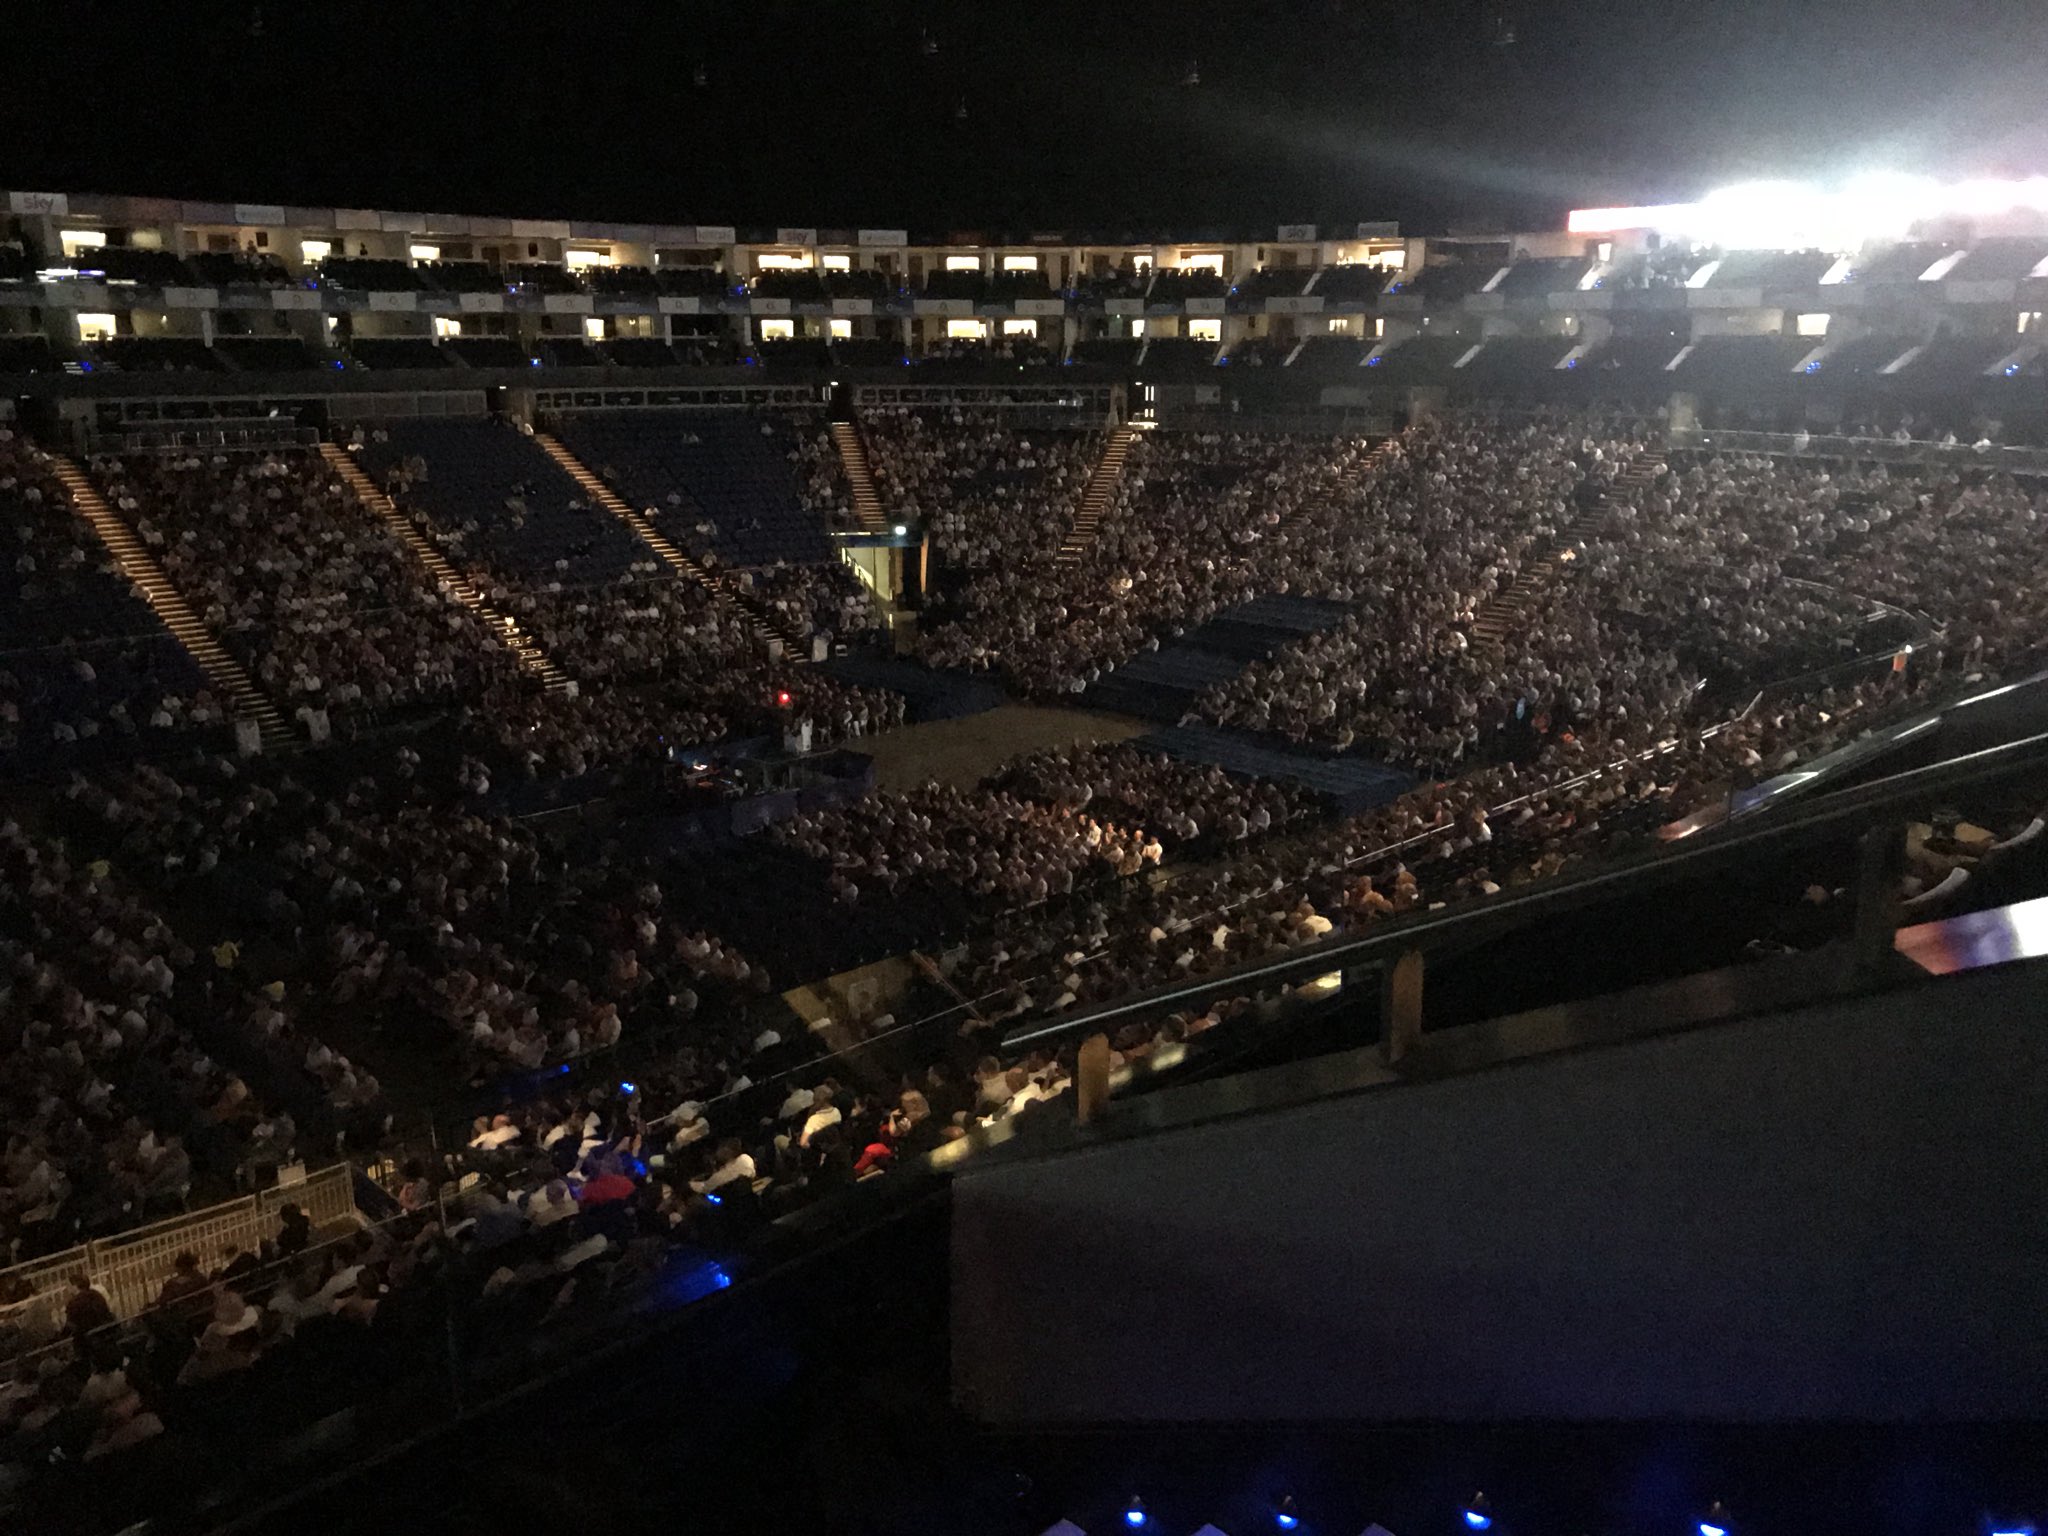 Julia Macfarlane 🏴󠁧󠁢󠁳󠁣󠁴󠁿🇮🇩 on Twitter: "At the O2 listening to Sam Harris, Jordan Peterson and Douglas Murray. dark but something tells me I may be the only POC in this